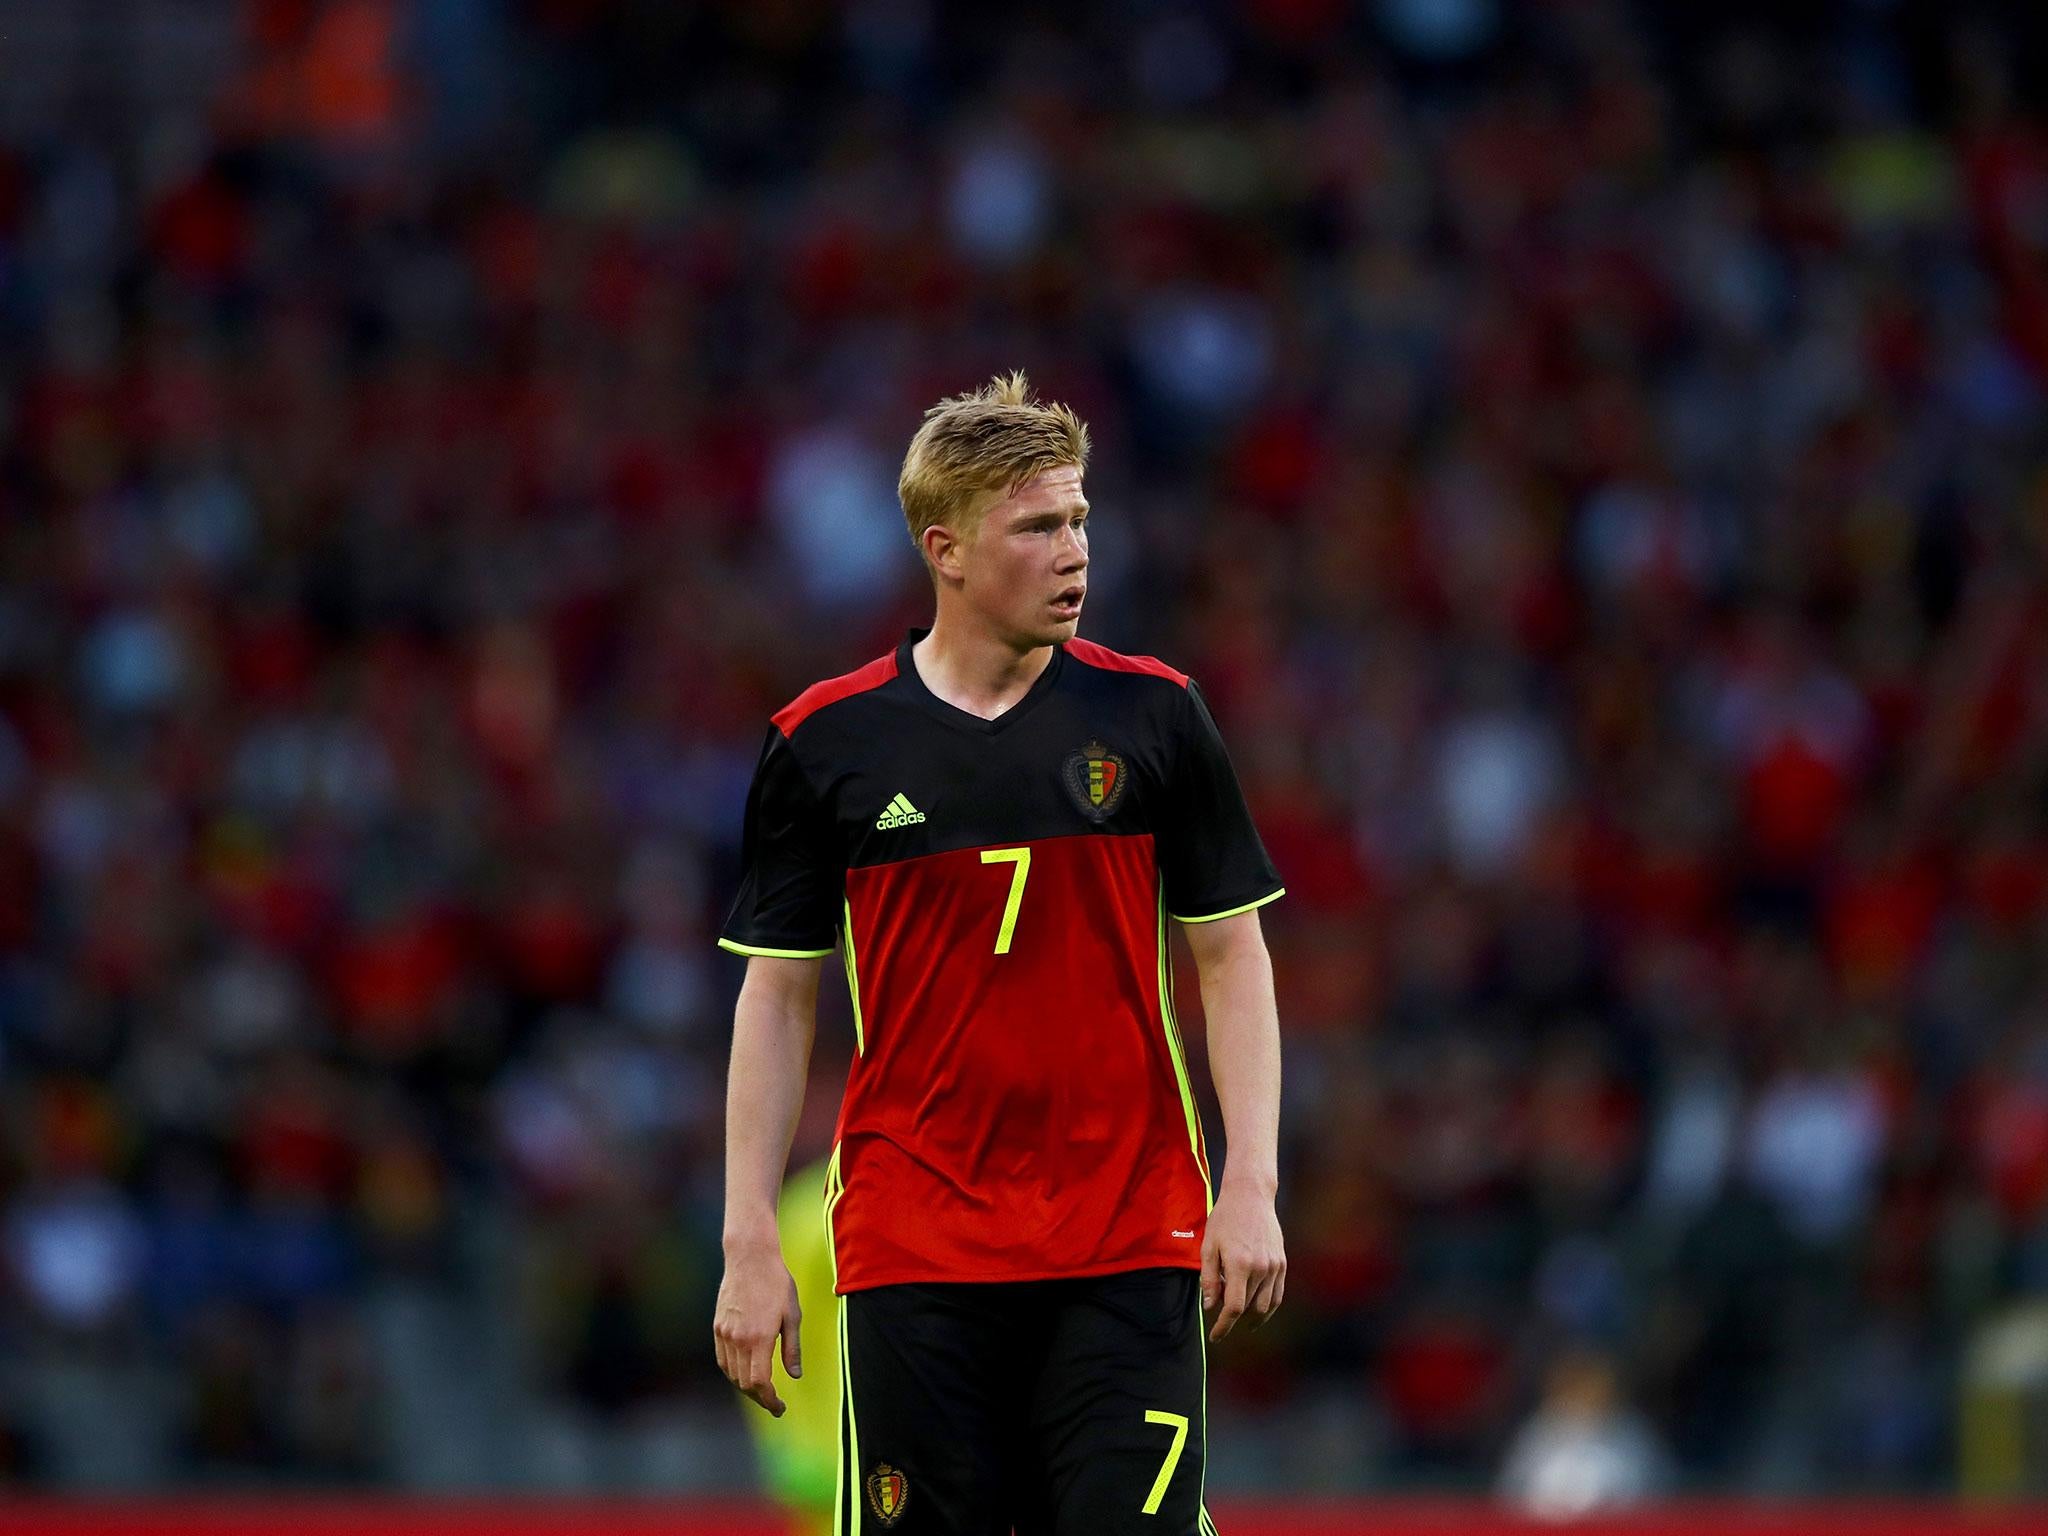 Kevin De Bruyne is shining for Manchester City this season but is frustrated playing for Belgium